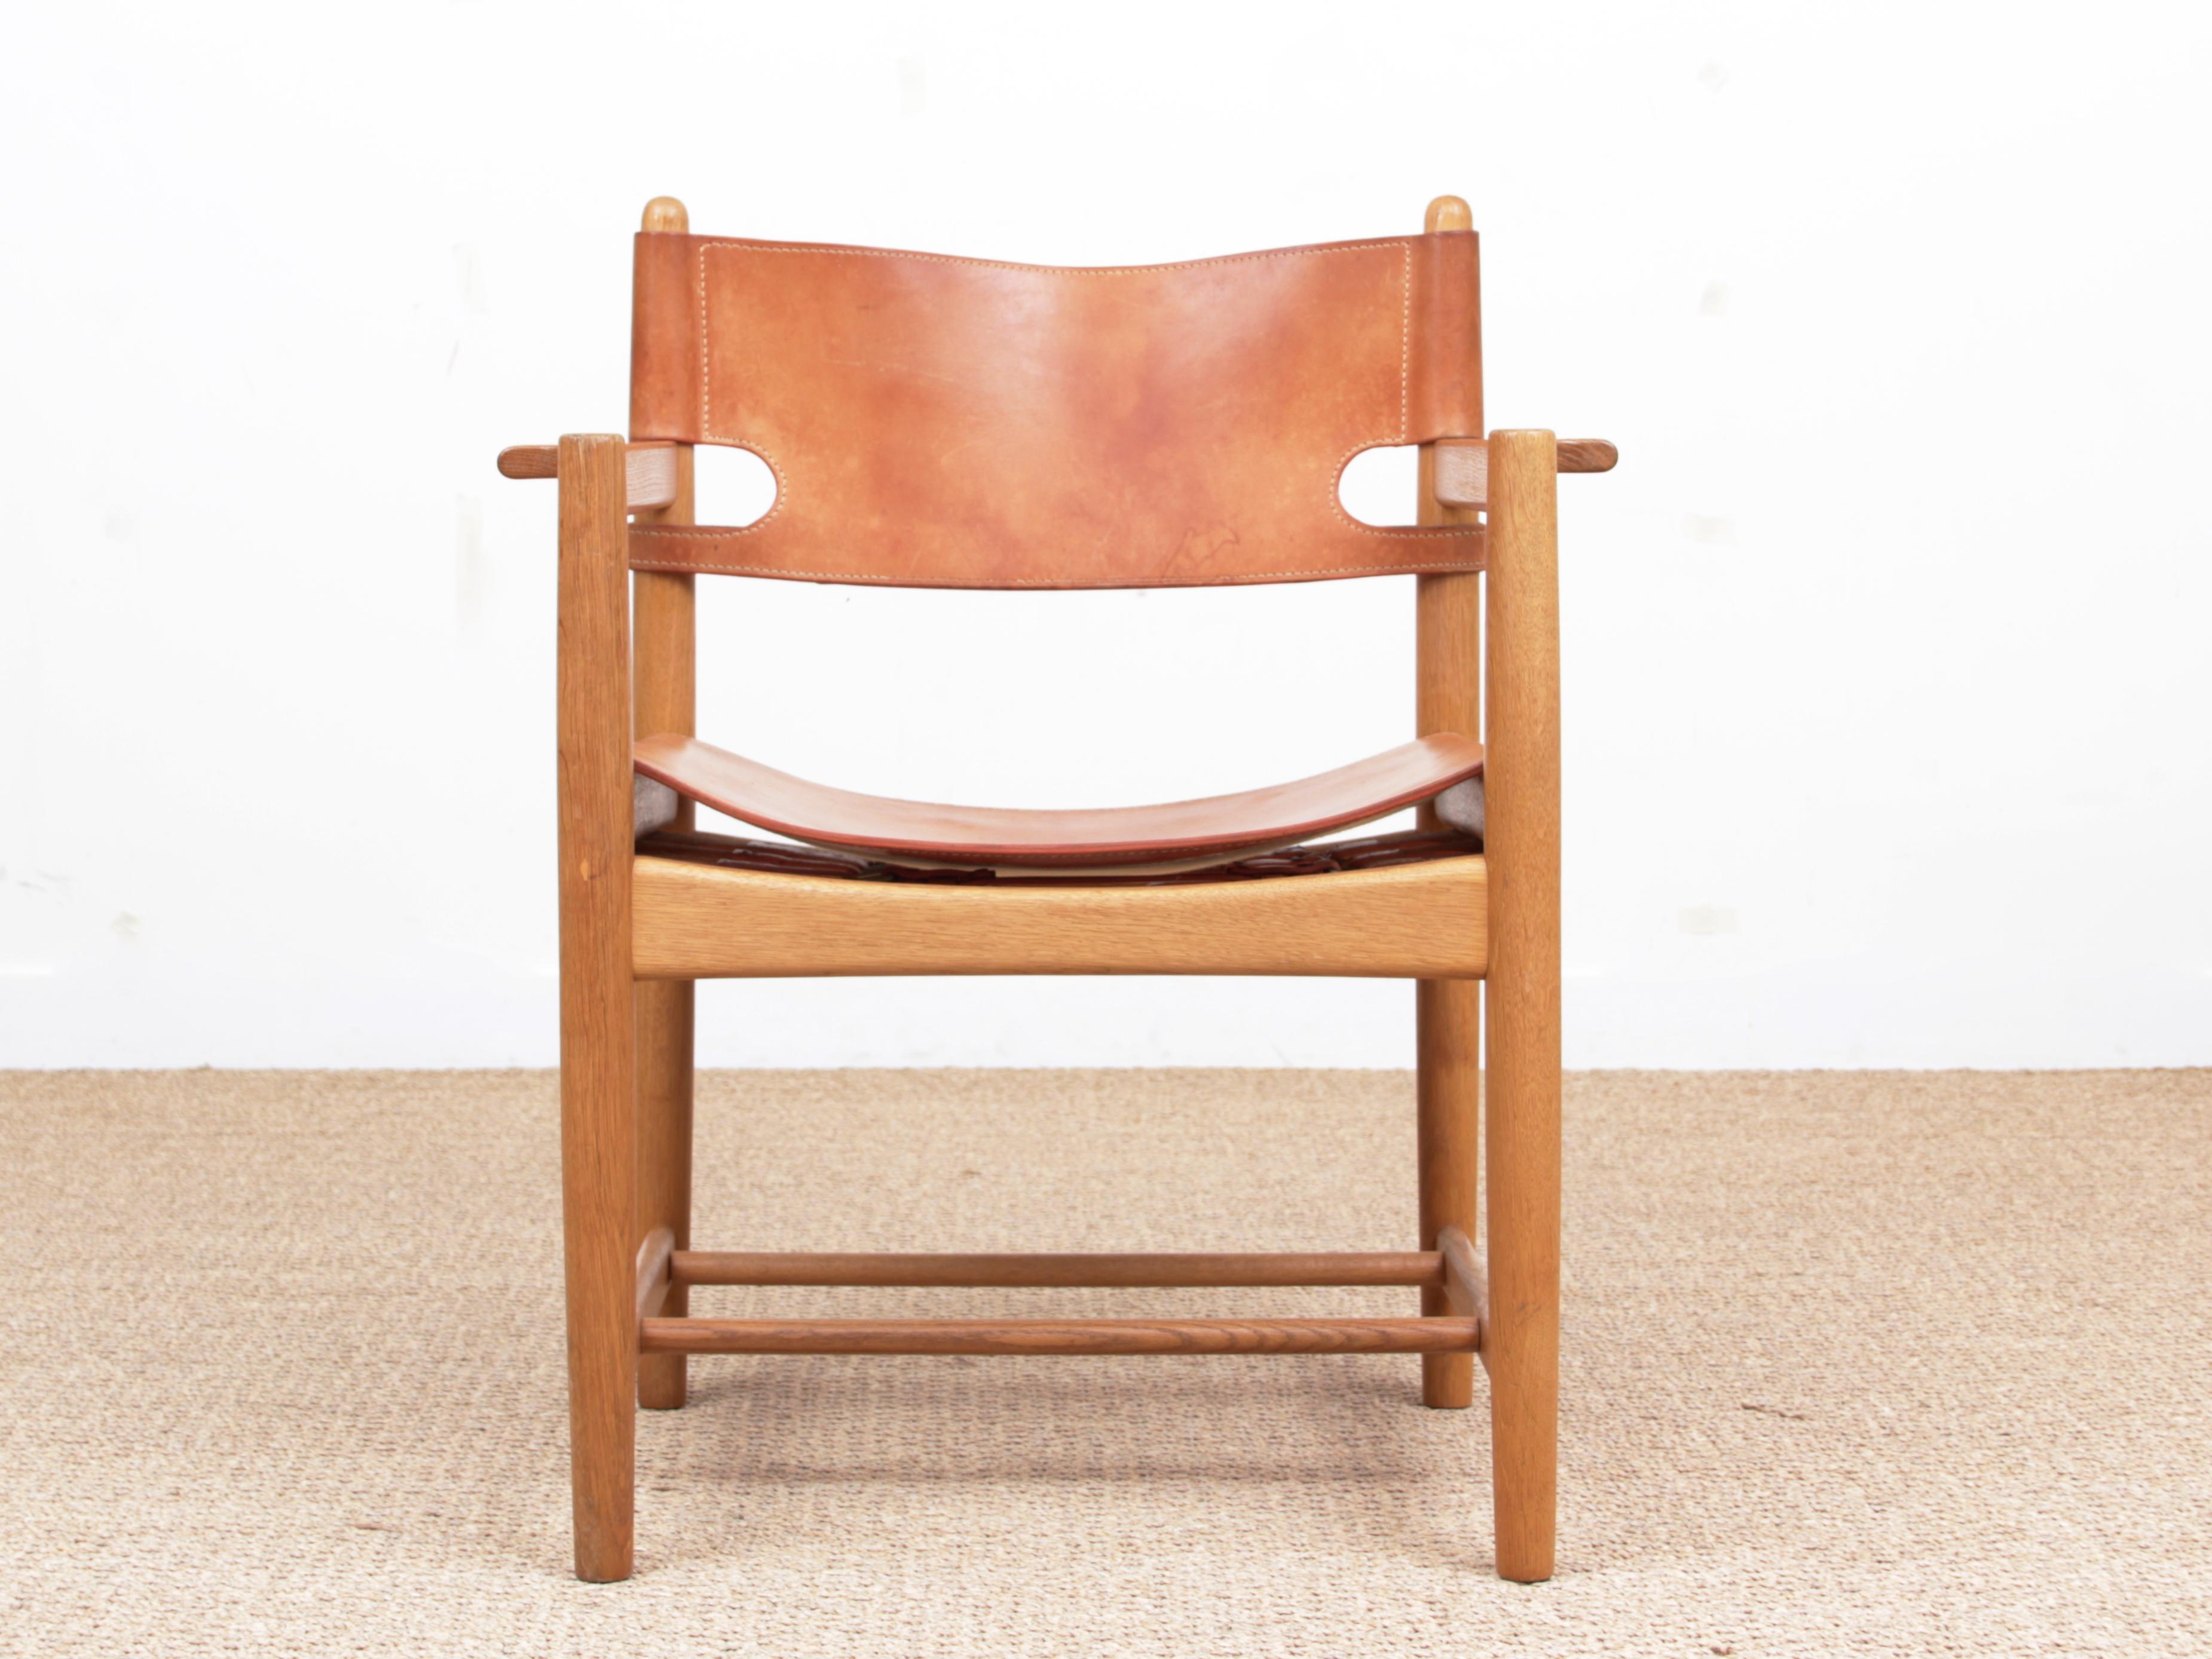 Mid-Century Modern scandinavian pair of arm chairs model 3238 by Borge Mogensen for Fredericia Furniture. Solid laquered oak and leather. Piece bought in 1970. Initialy produced by cabinet maker Erhard Rasmussen, it has been later produced by